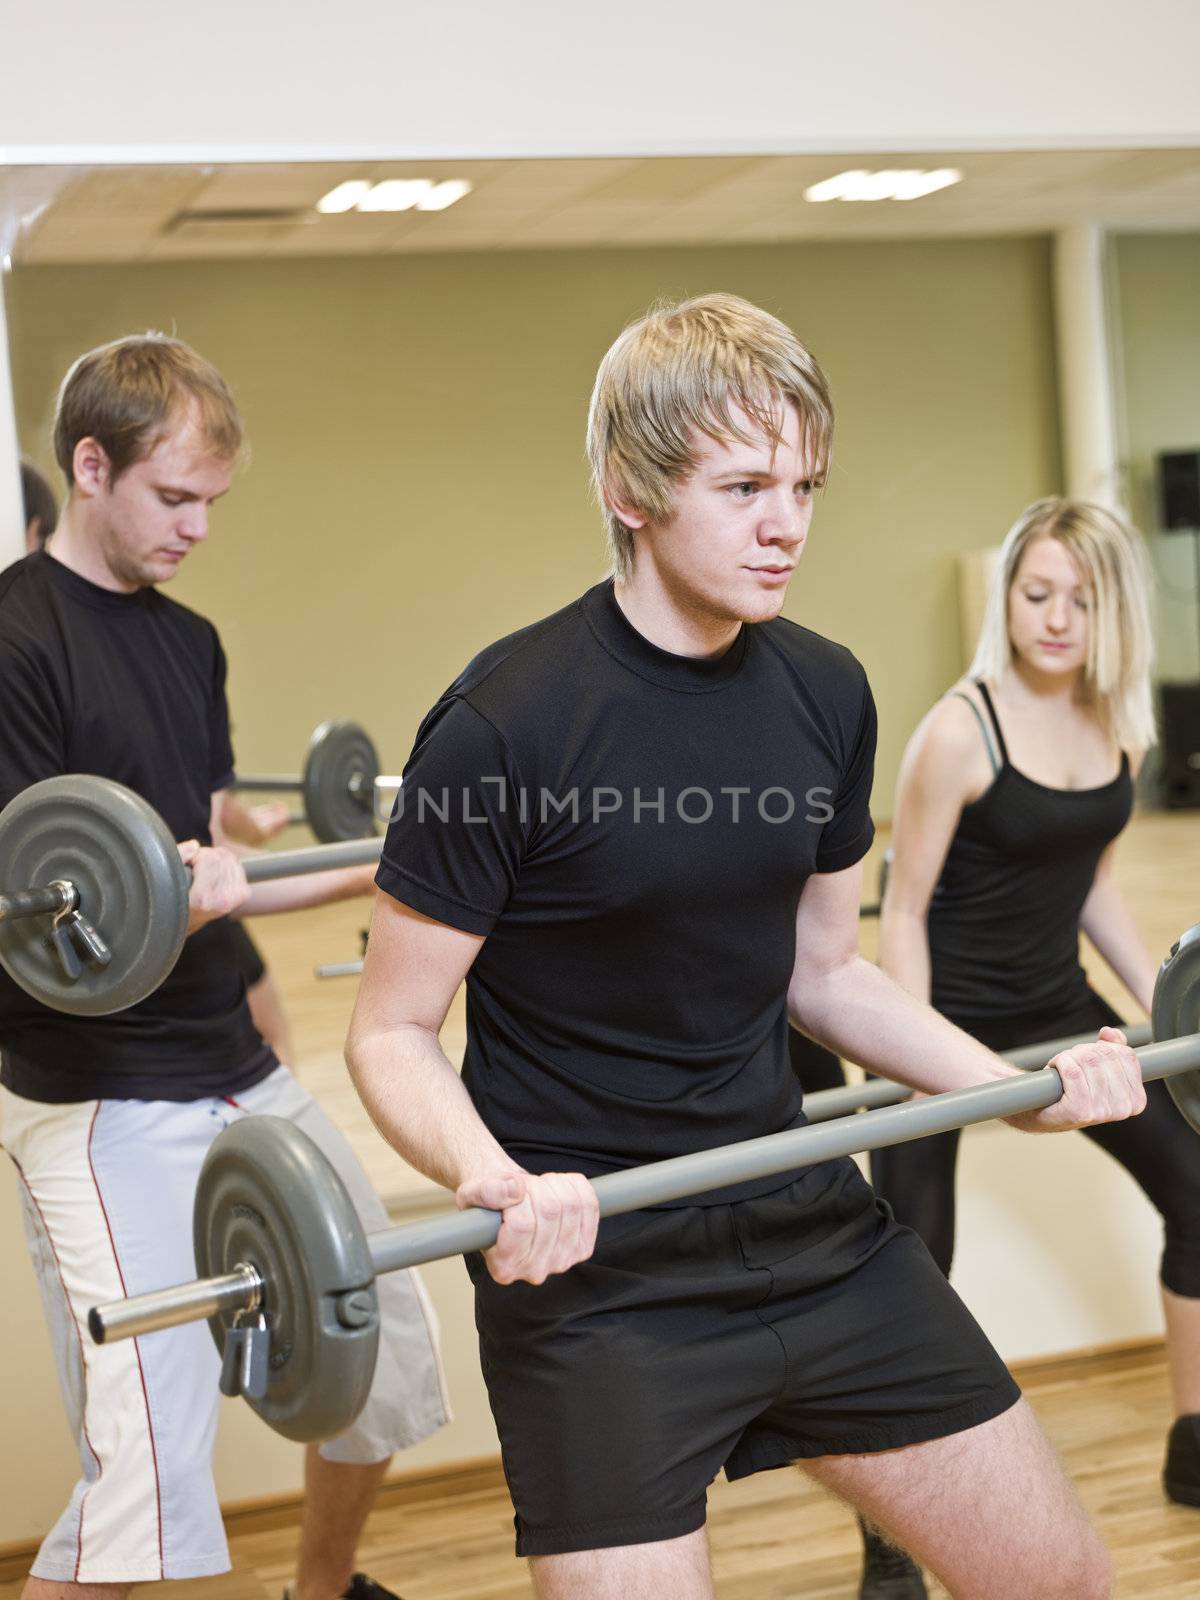 Group of people lifting weights with a young man in focus